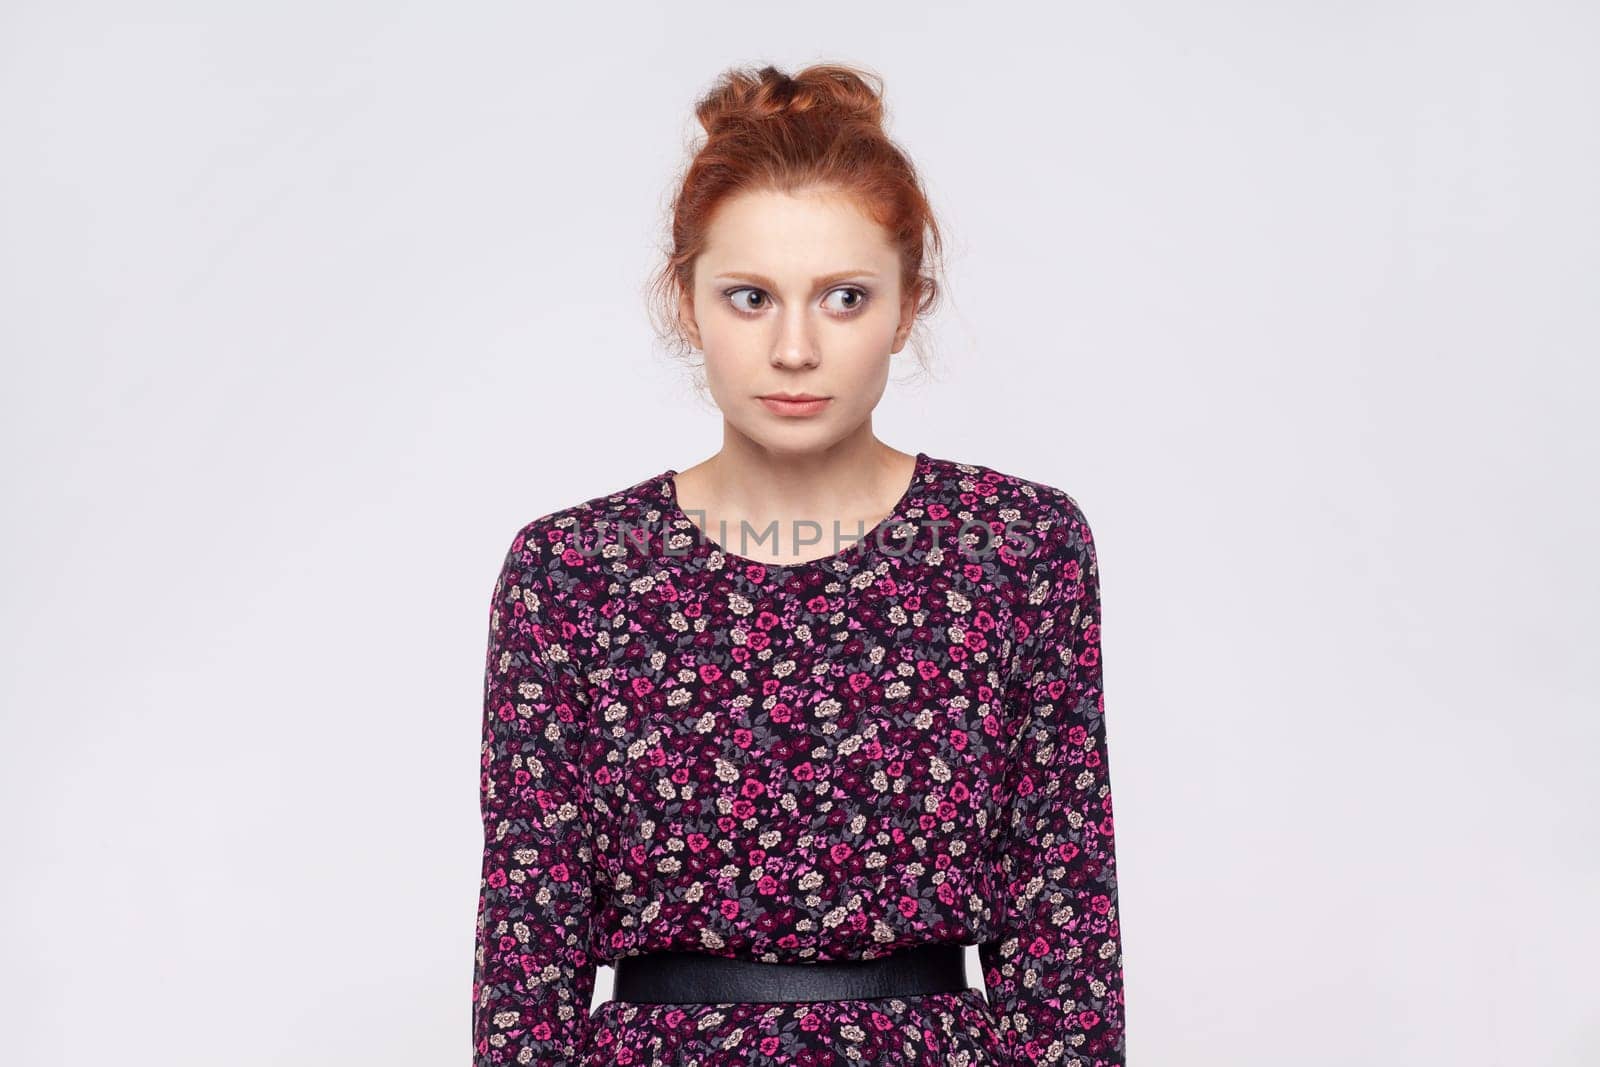 Worried serious ginger woman wearing dress looking away with scared, frighten expression, thinking. by Khosro1